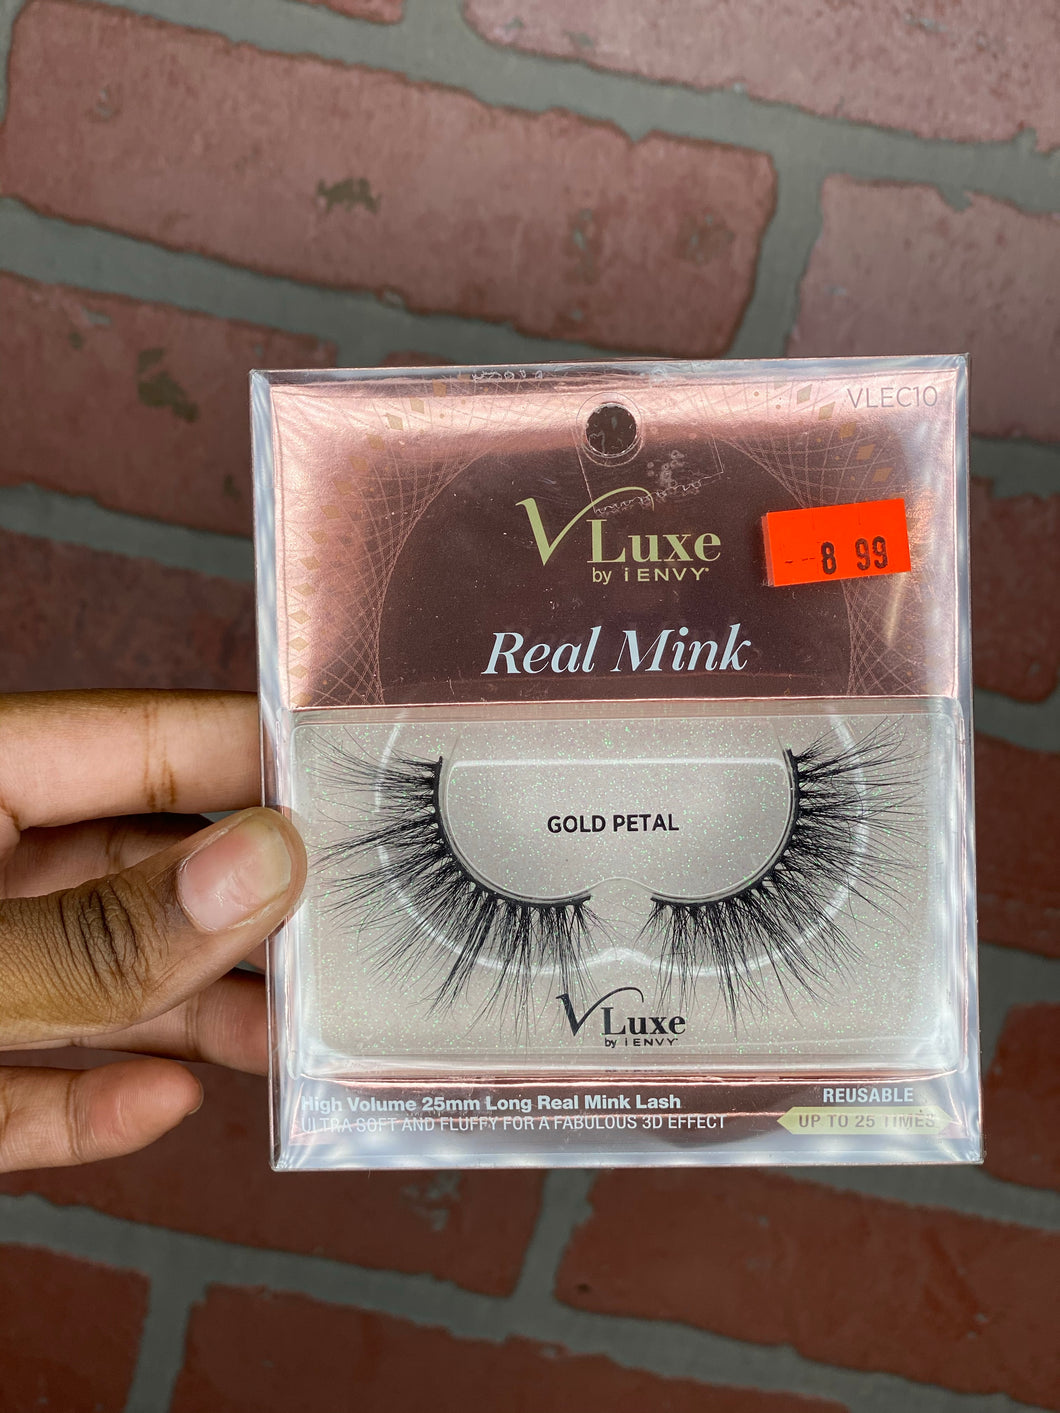 V luxe real mink lashes